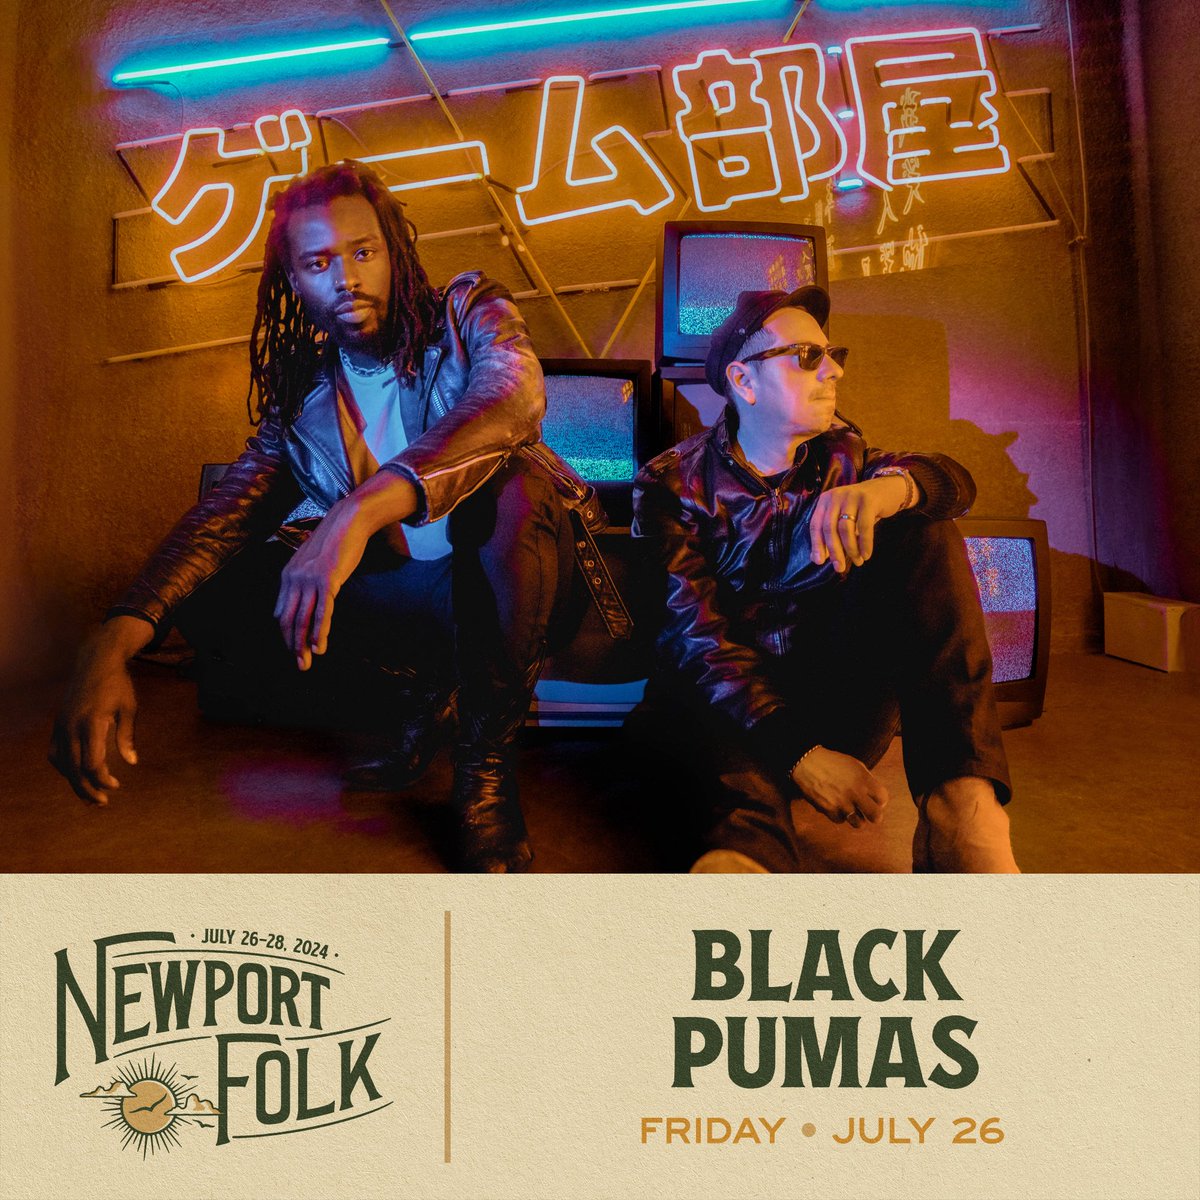 Welcome back, @BlackPumasMusic! @newportfestsorg has made a grant to @hihowareyouproj, an Austin, TX based non-profit that celebrates the life and legacy of musician, songwriter, and artist, Daniel Johnston with the mission to remove the stigma around mental health.